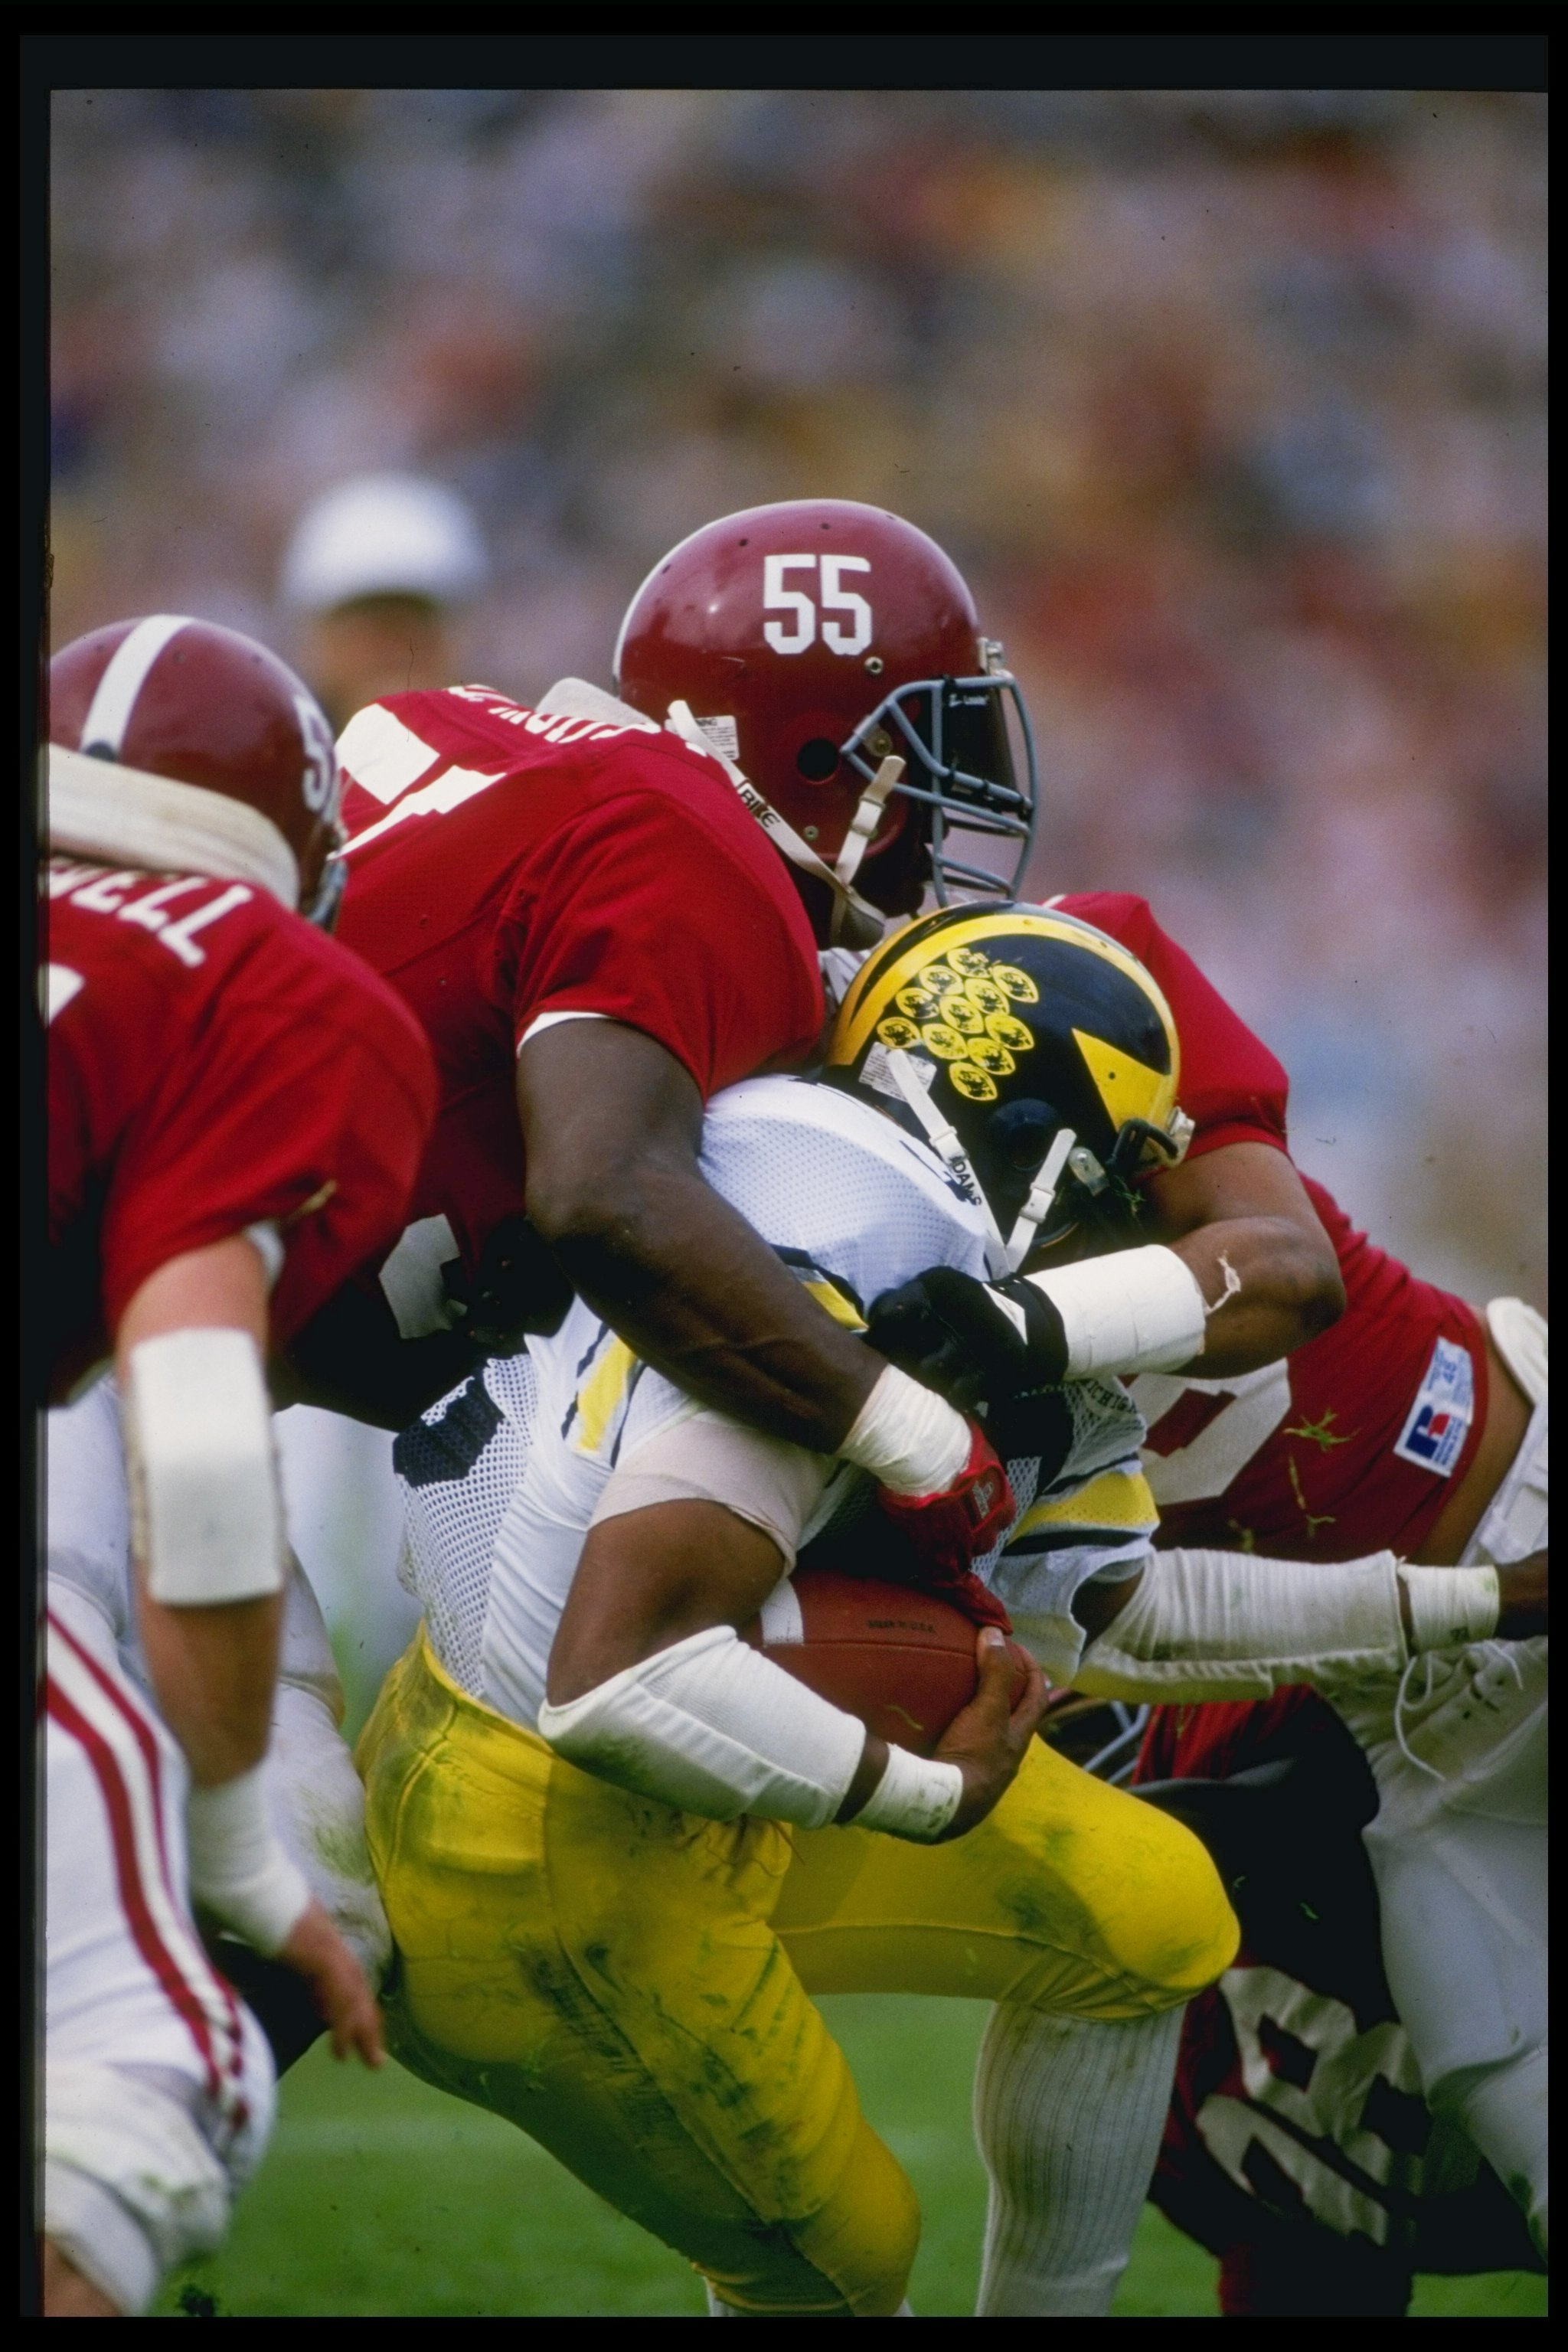 Linebacker Derrick Thomas of the Alabama Crimson Tide makes a tackle during a game against the Michigan Wolverines at Byrant Denny Stadium in Tuscawosa, Alabama.